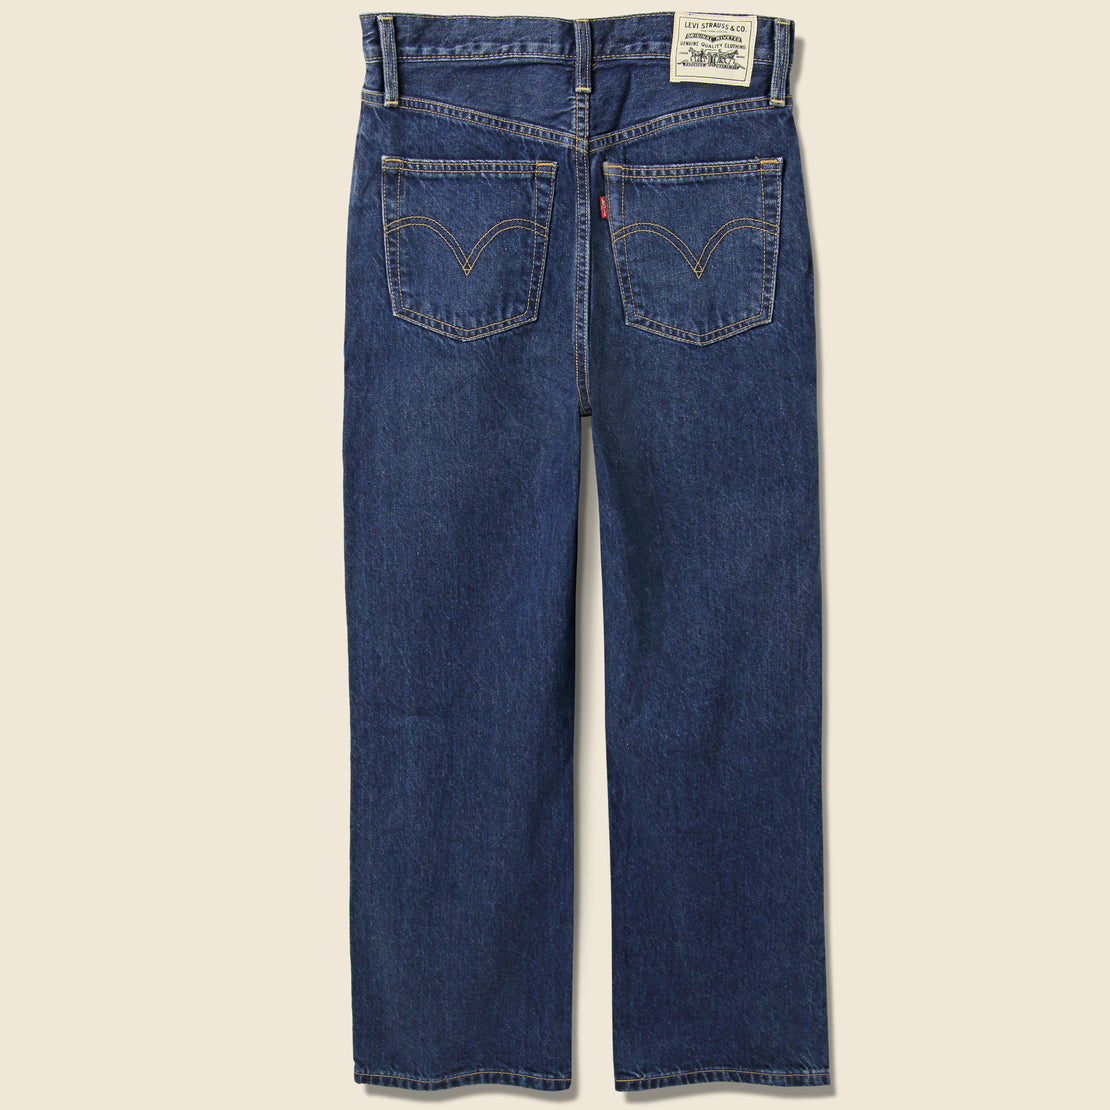 Ribcage Straight Ankle Jean - Ground Swell - Levis Premium - STAG Provisions - W - Pants - Denim